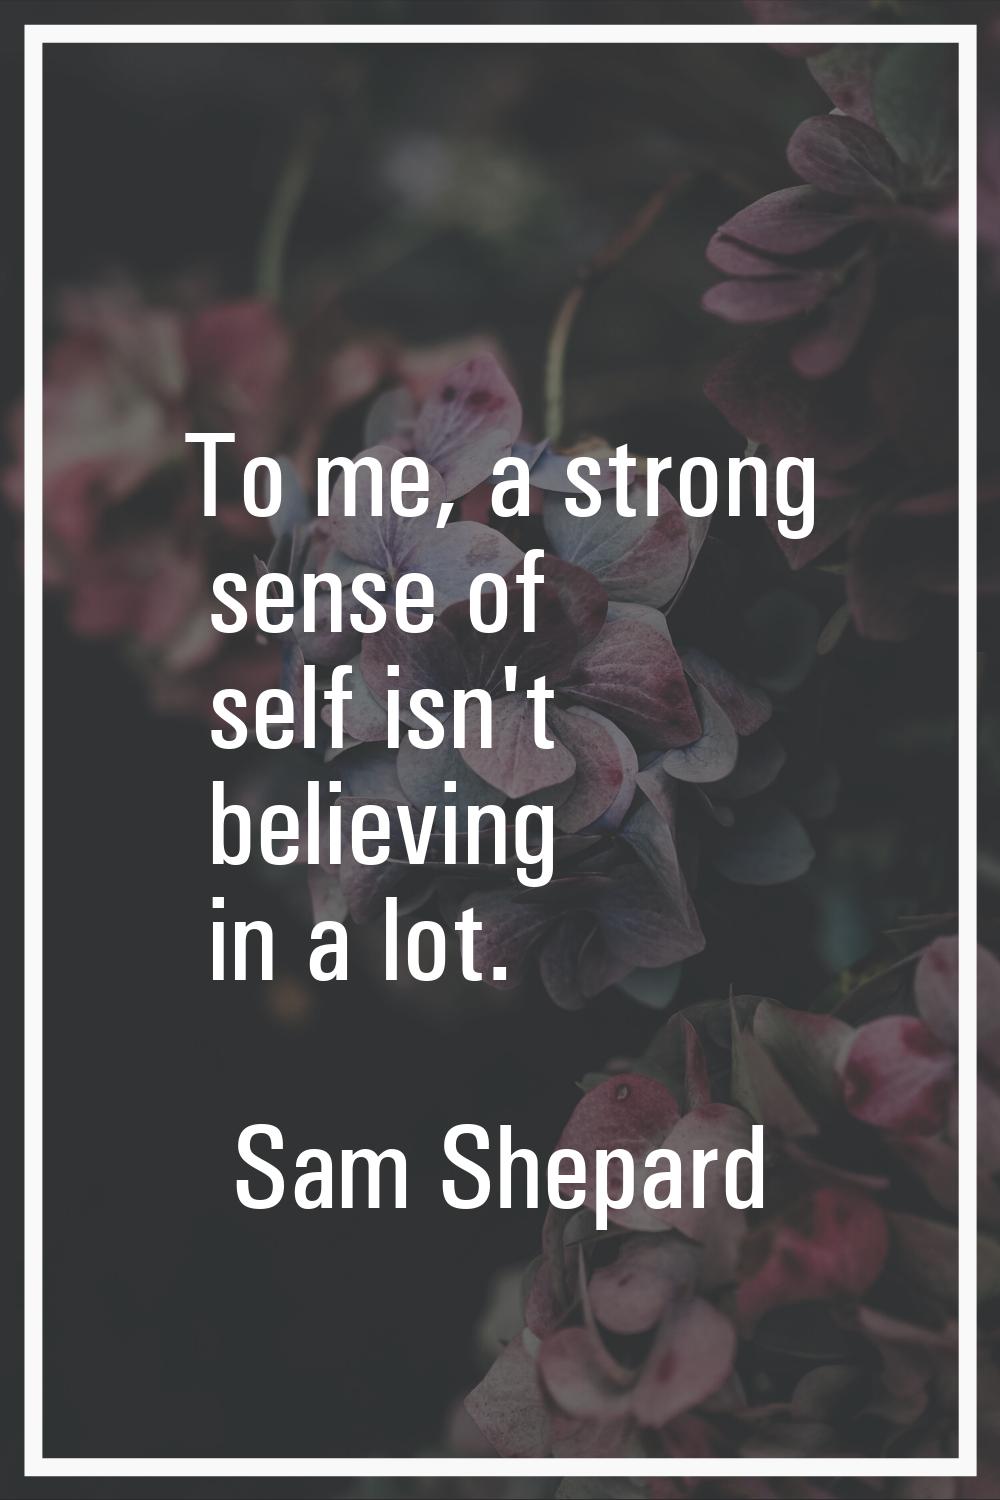 To me, a strong sense of self isn't believing in a lot.